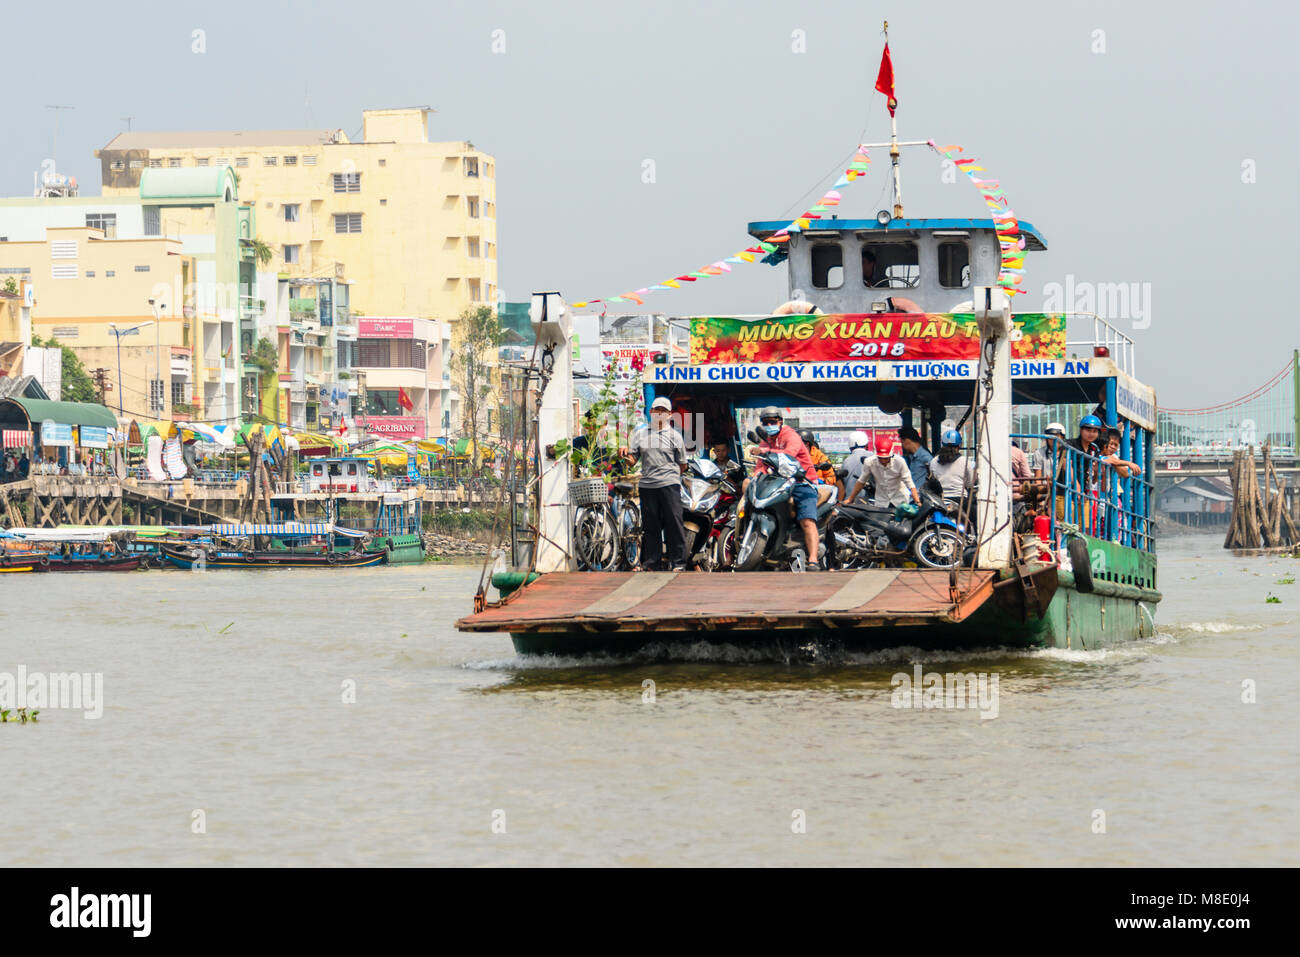 Chua Vinh Trang to Tan Long Ferry filled with people on scooters, Meekong Delta, Vietnam Stock Photo